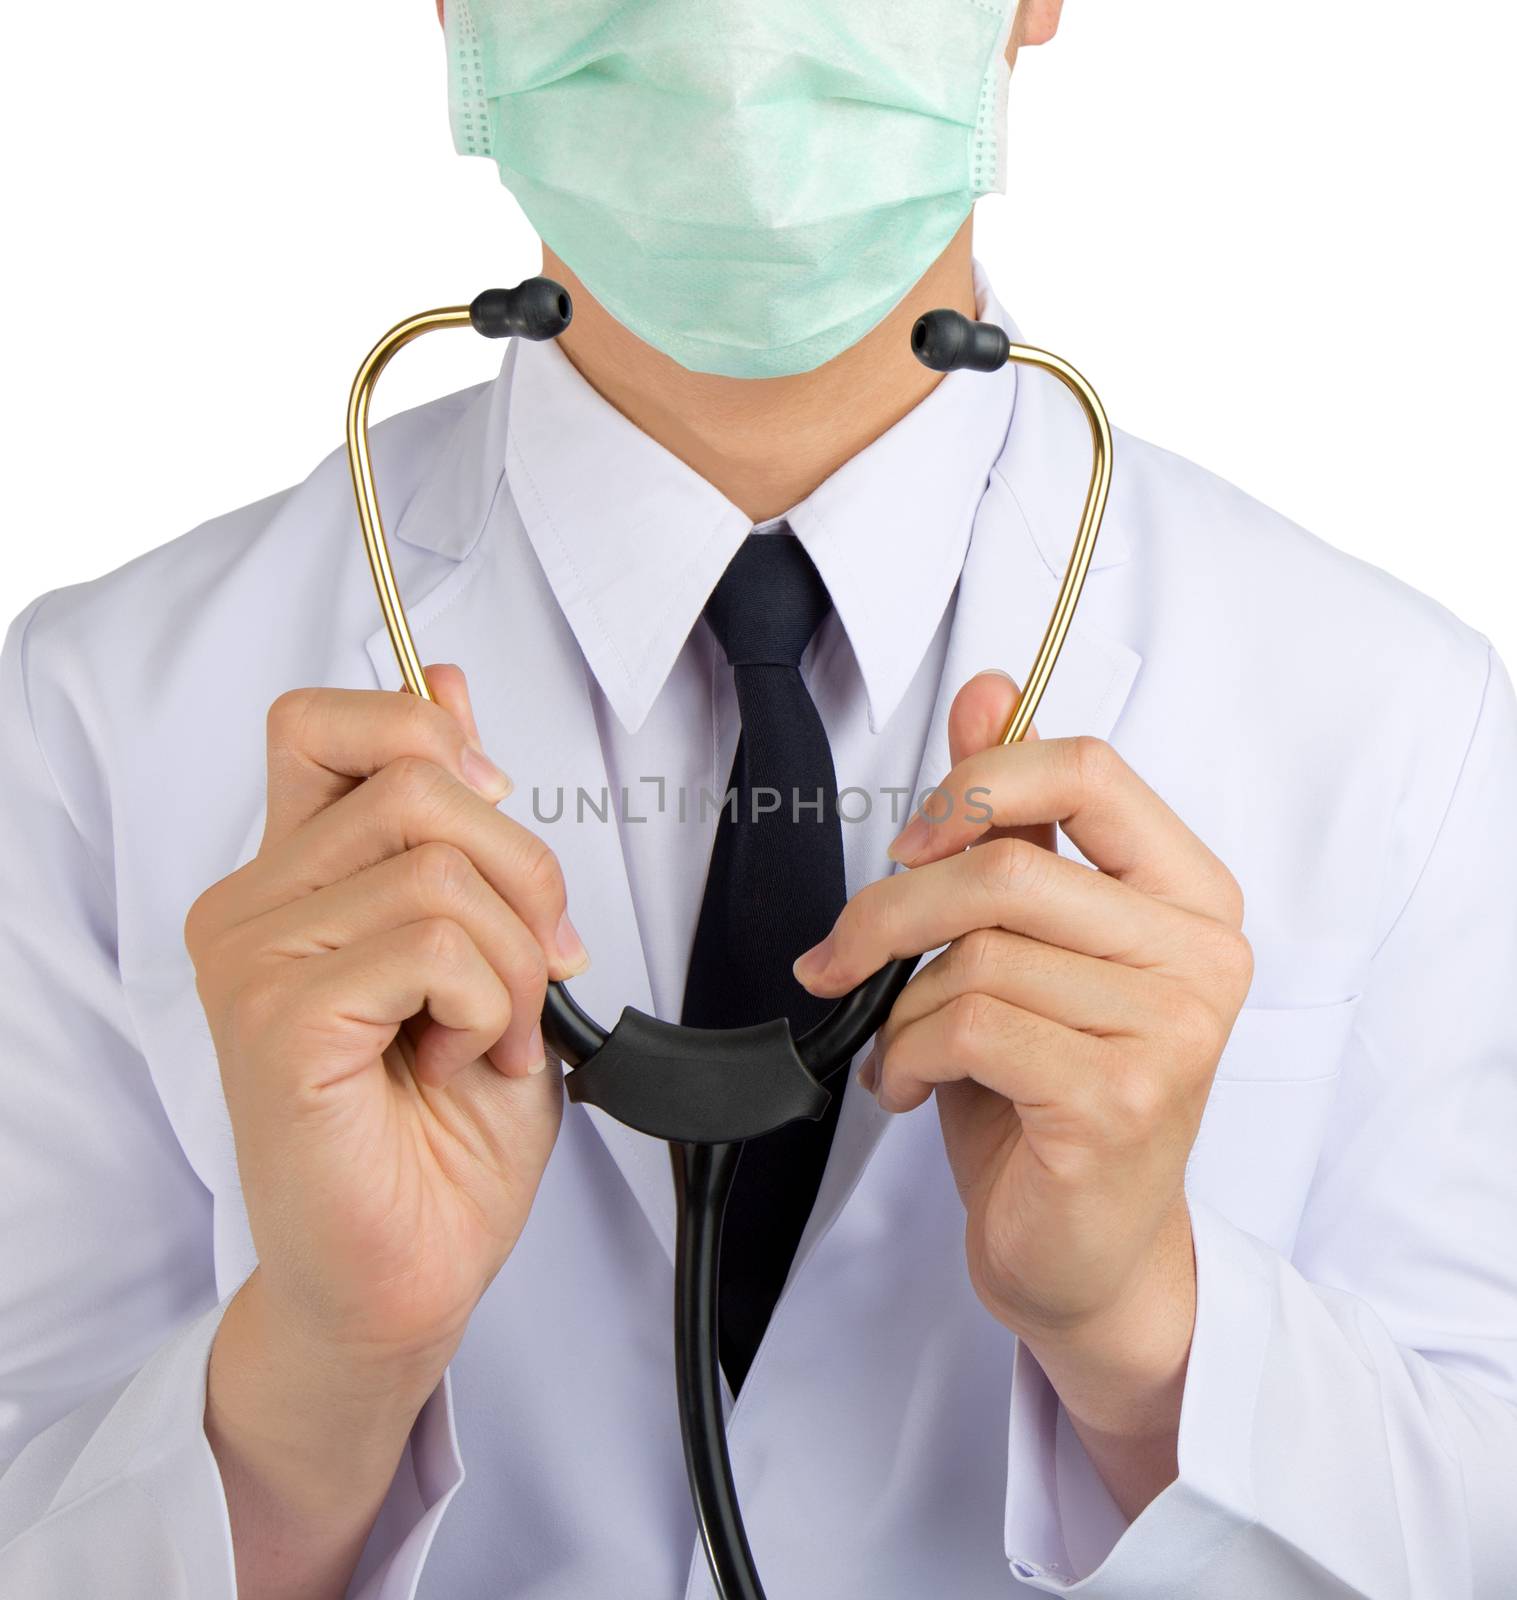 Well dressed man doctor cover stethoscope prepare inspect patien by jayzynism